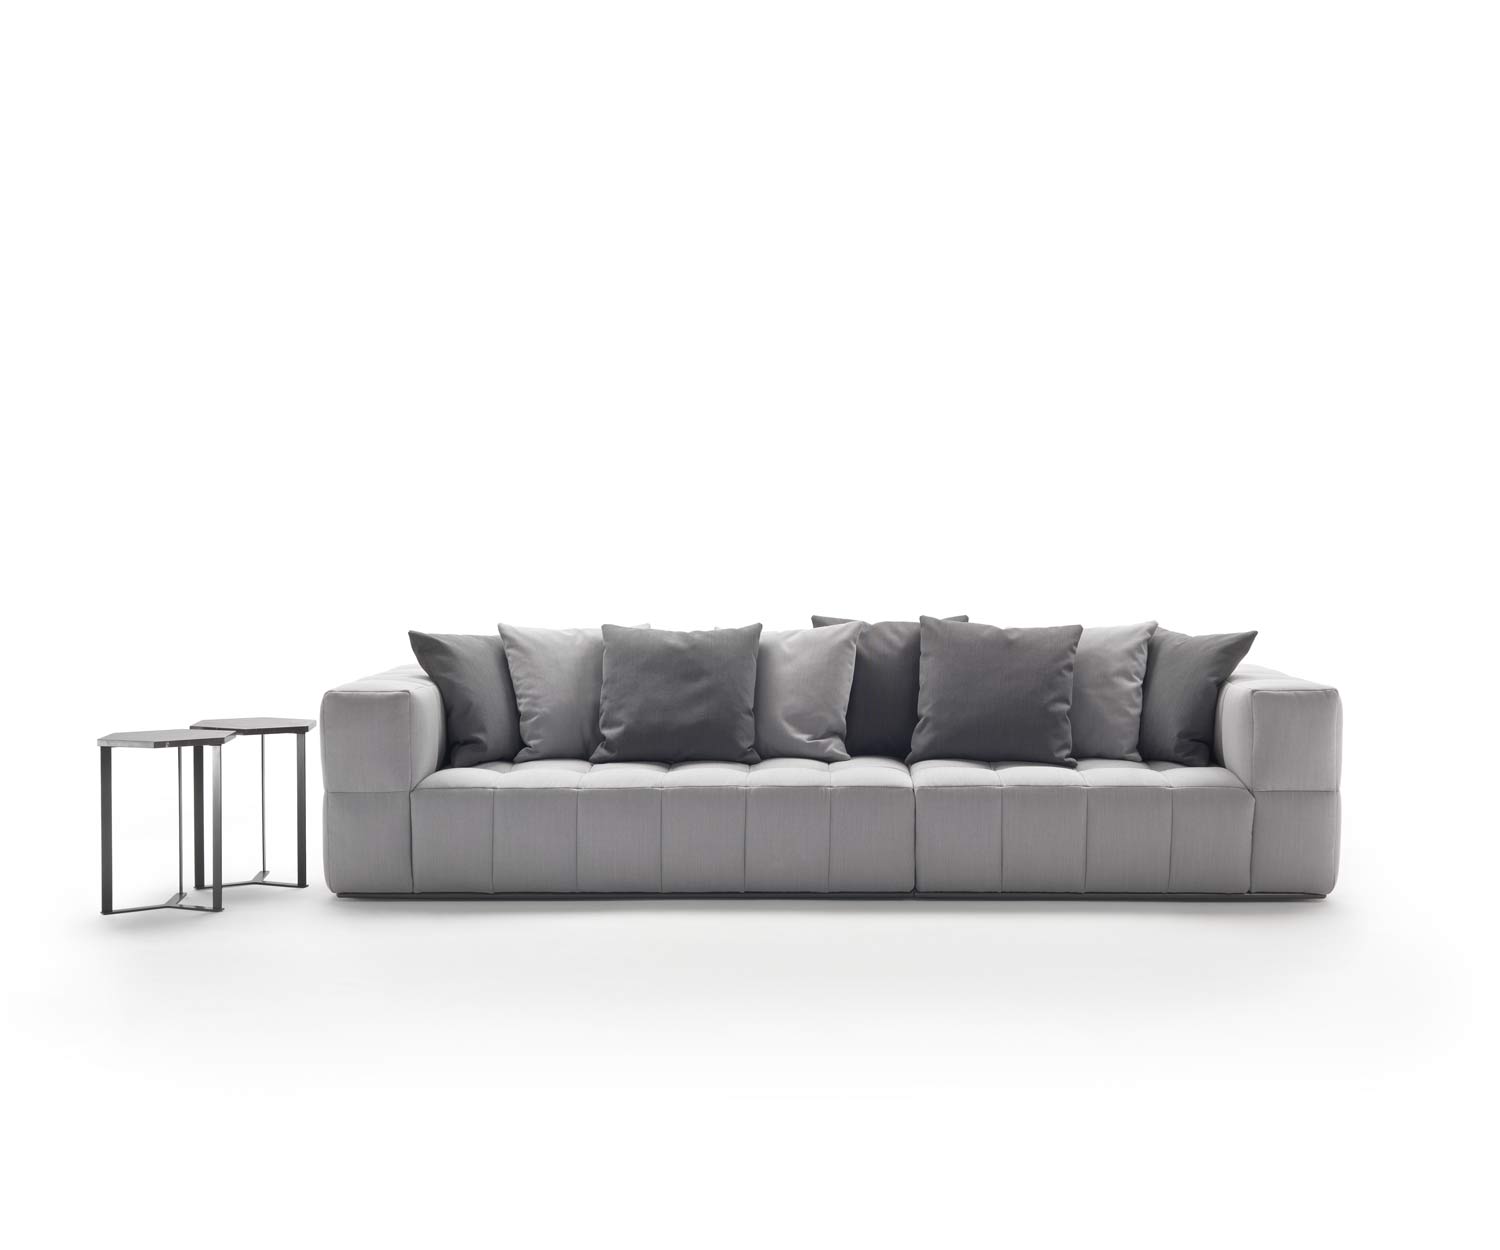 Exclusif Marelli Canapé design Andy Lounge Couch